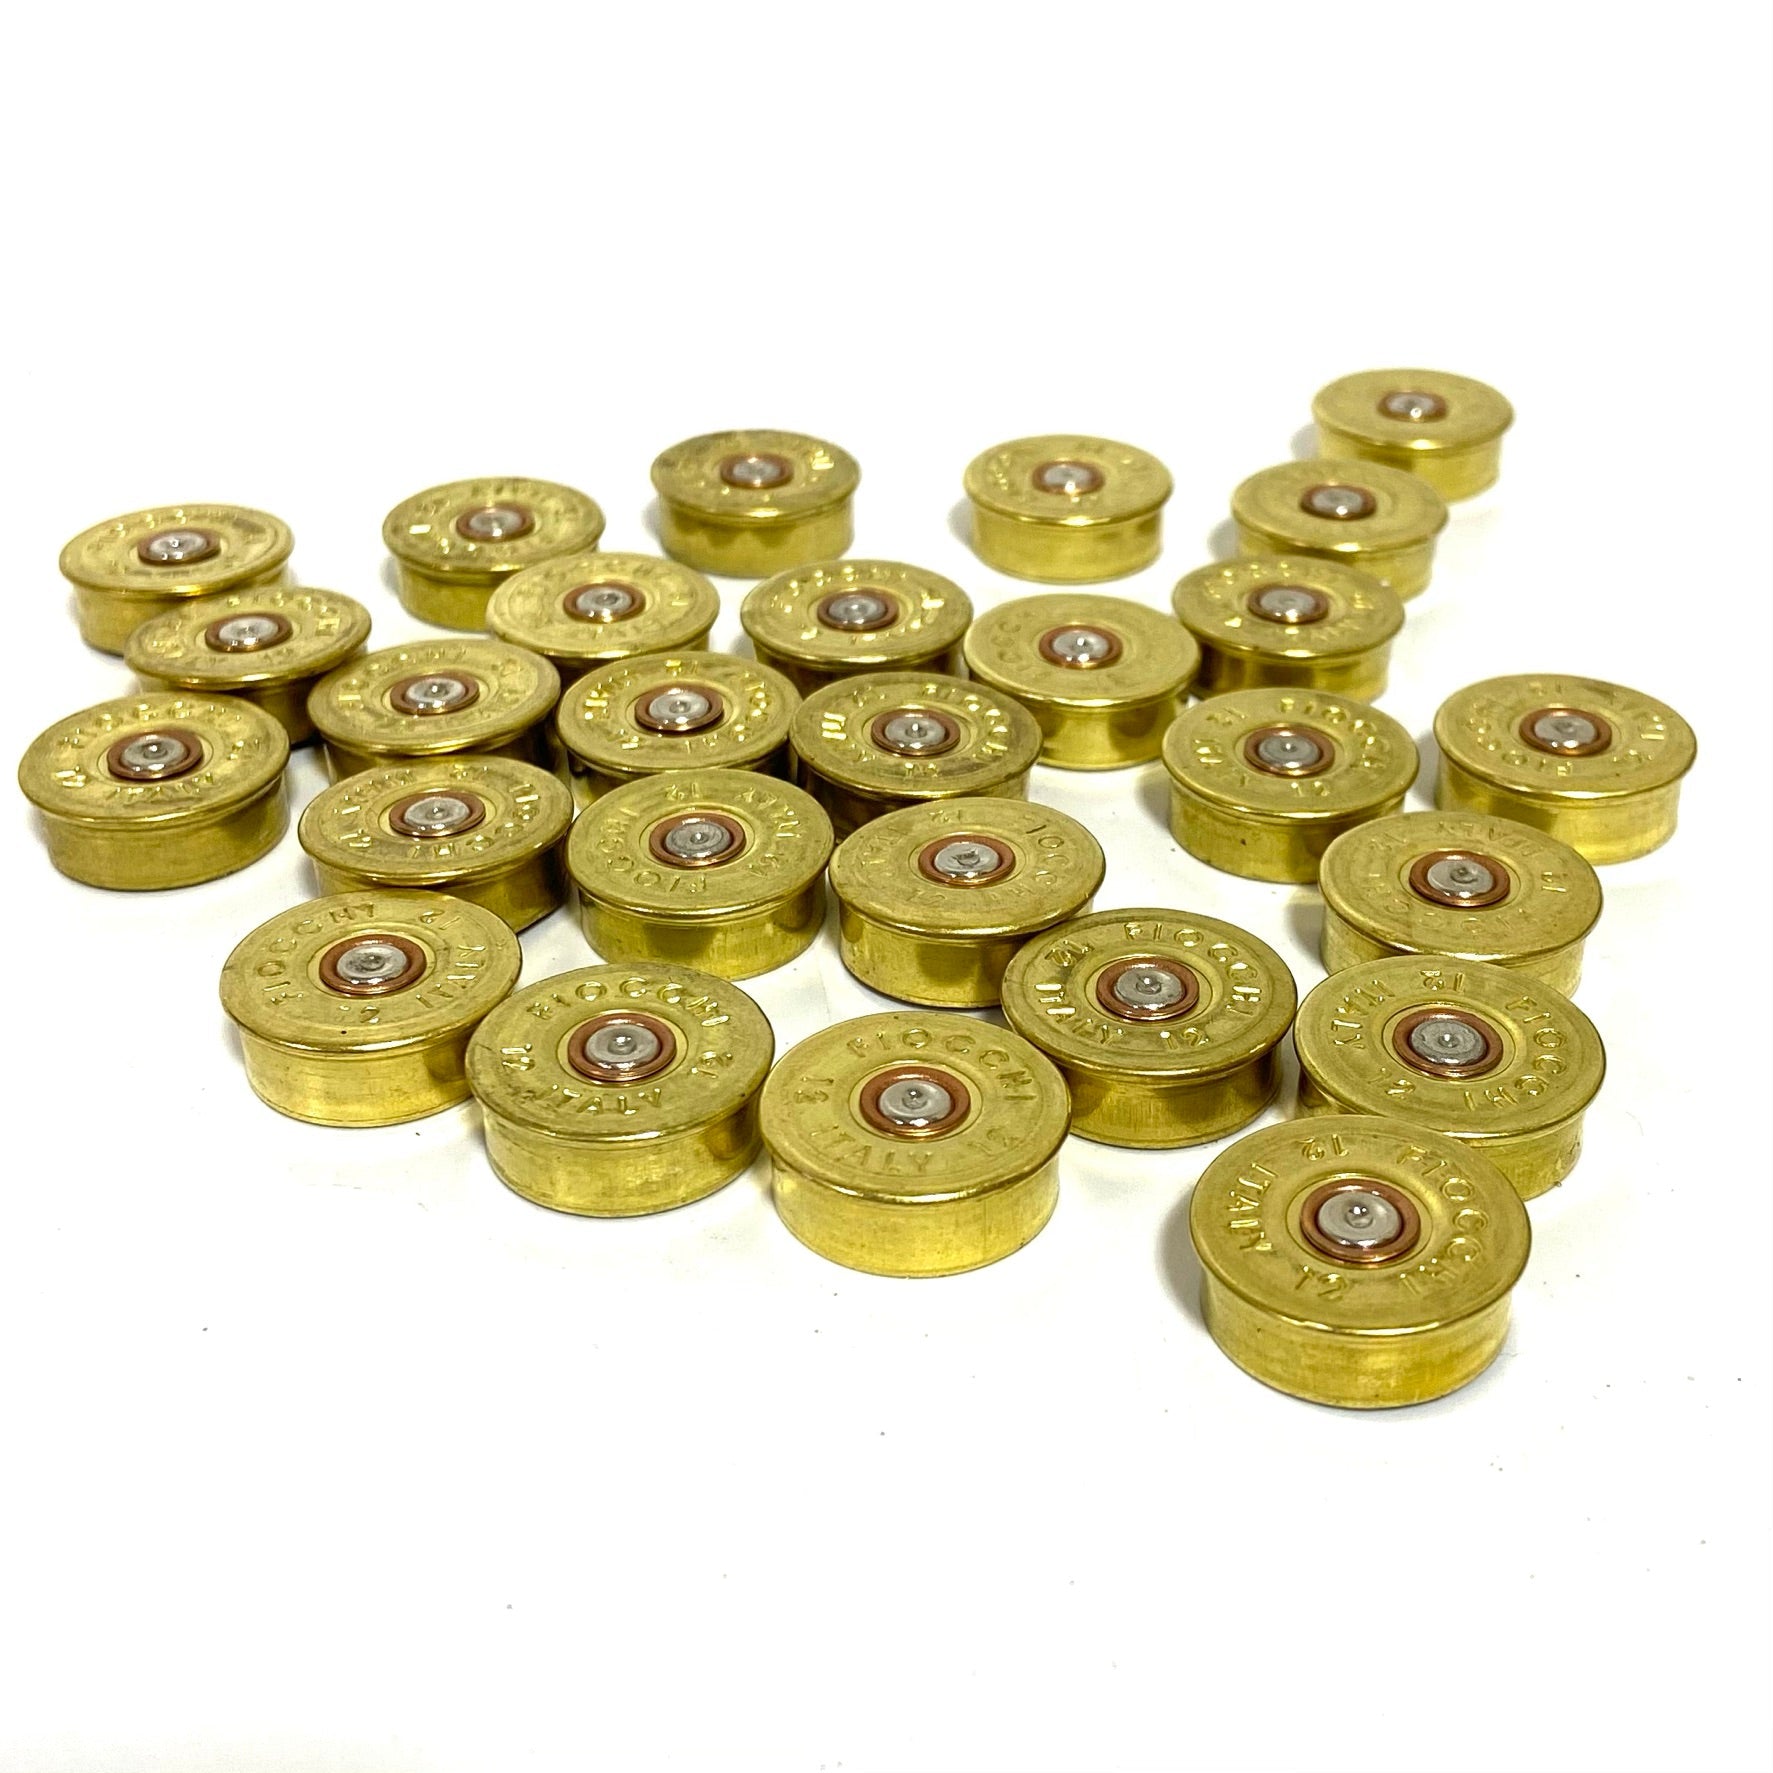 12 Gauge Shotgun Shell Headstamps End Caps | Mixed mfg BRASS/GOLD-color |  DIY Craft Supply for Bullet Jewelry, Steampunk Crafts, Magnets, etc.